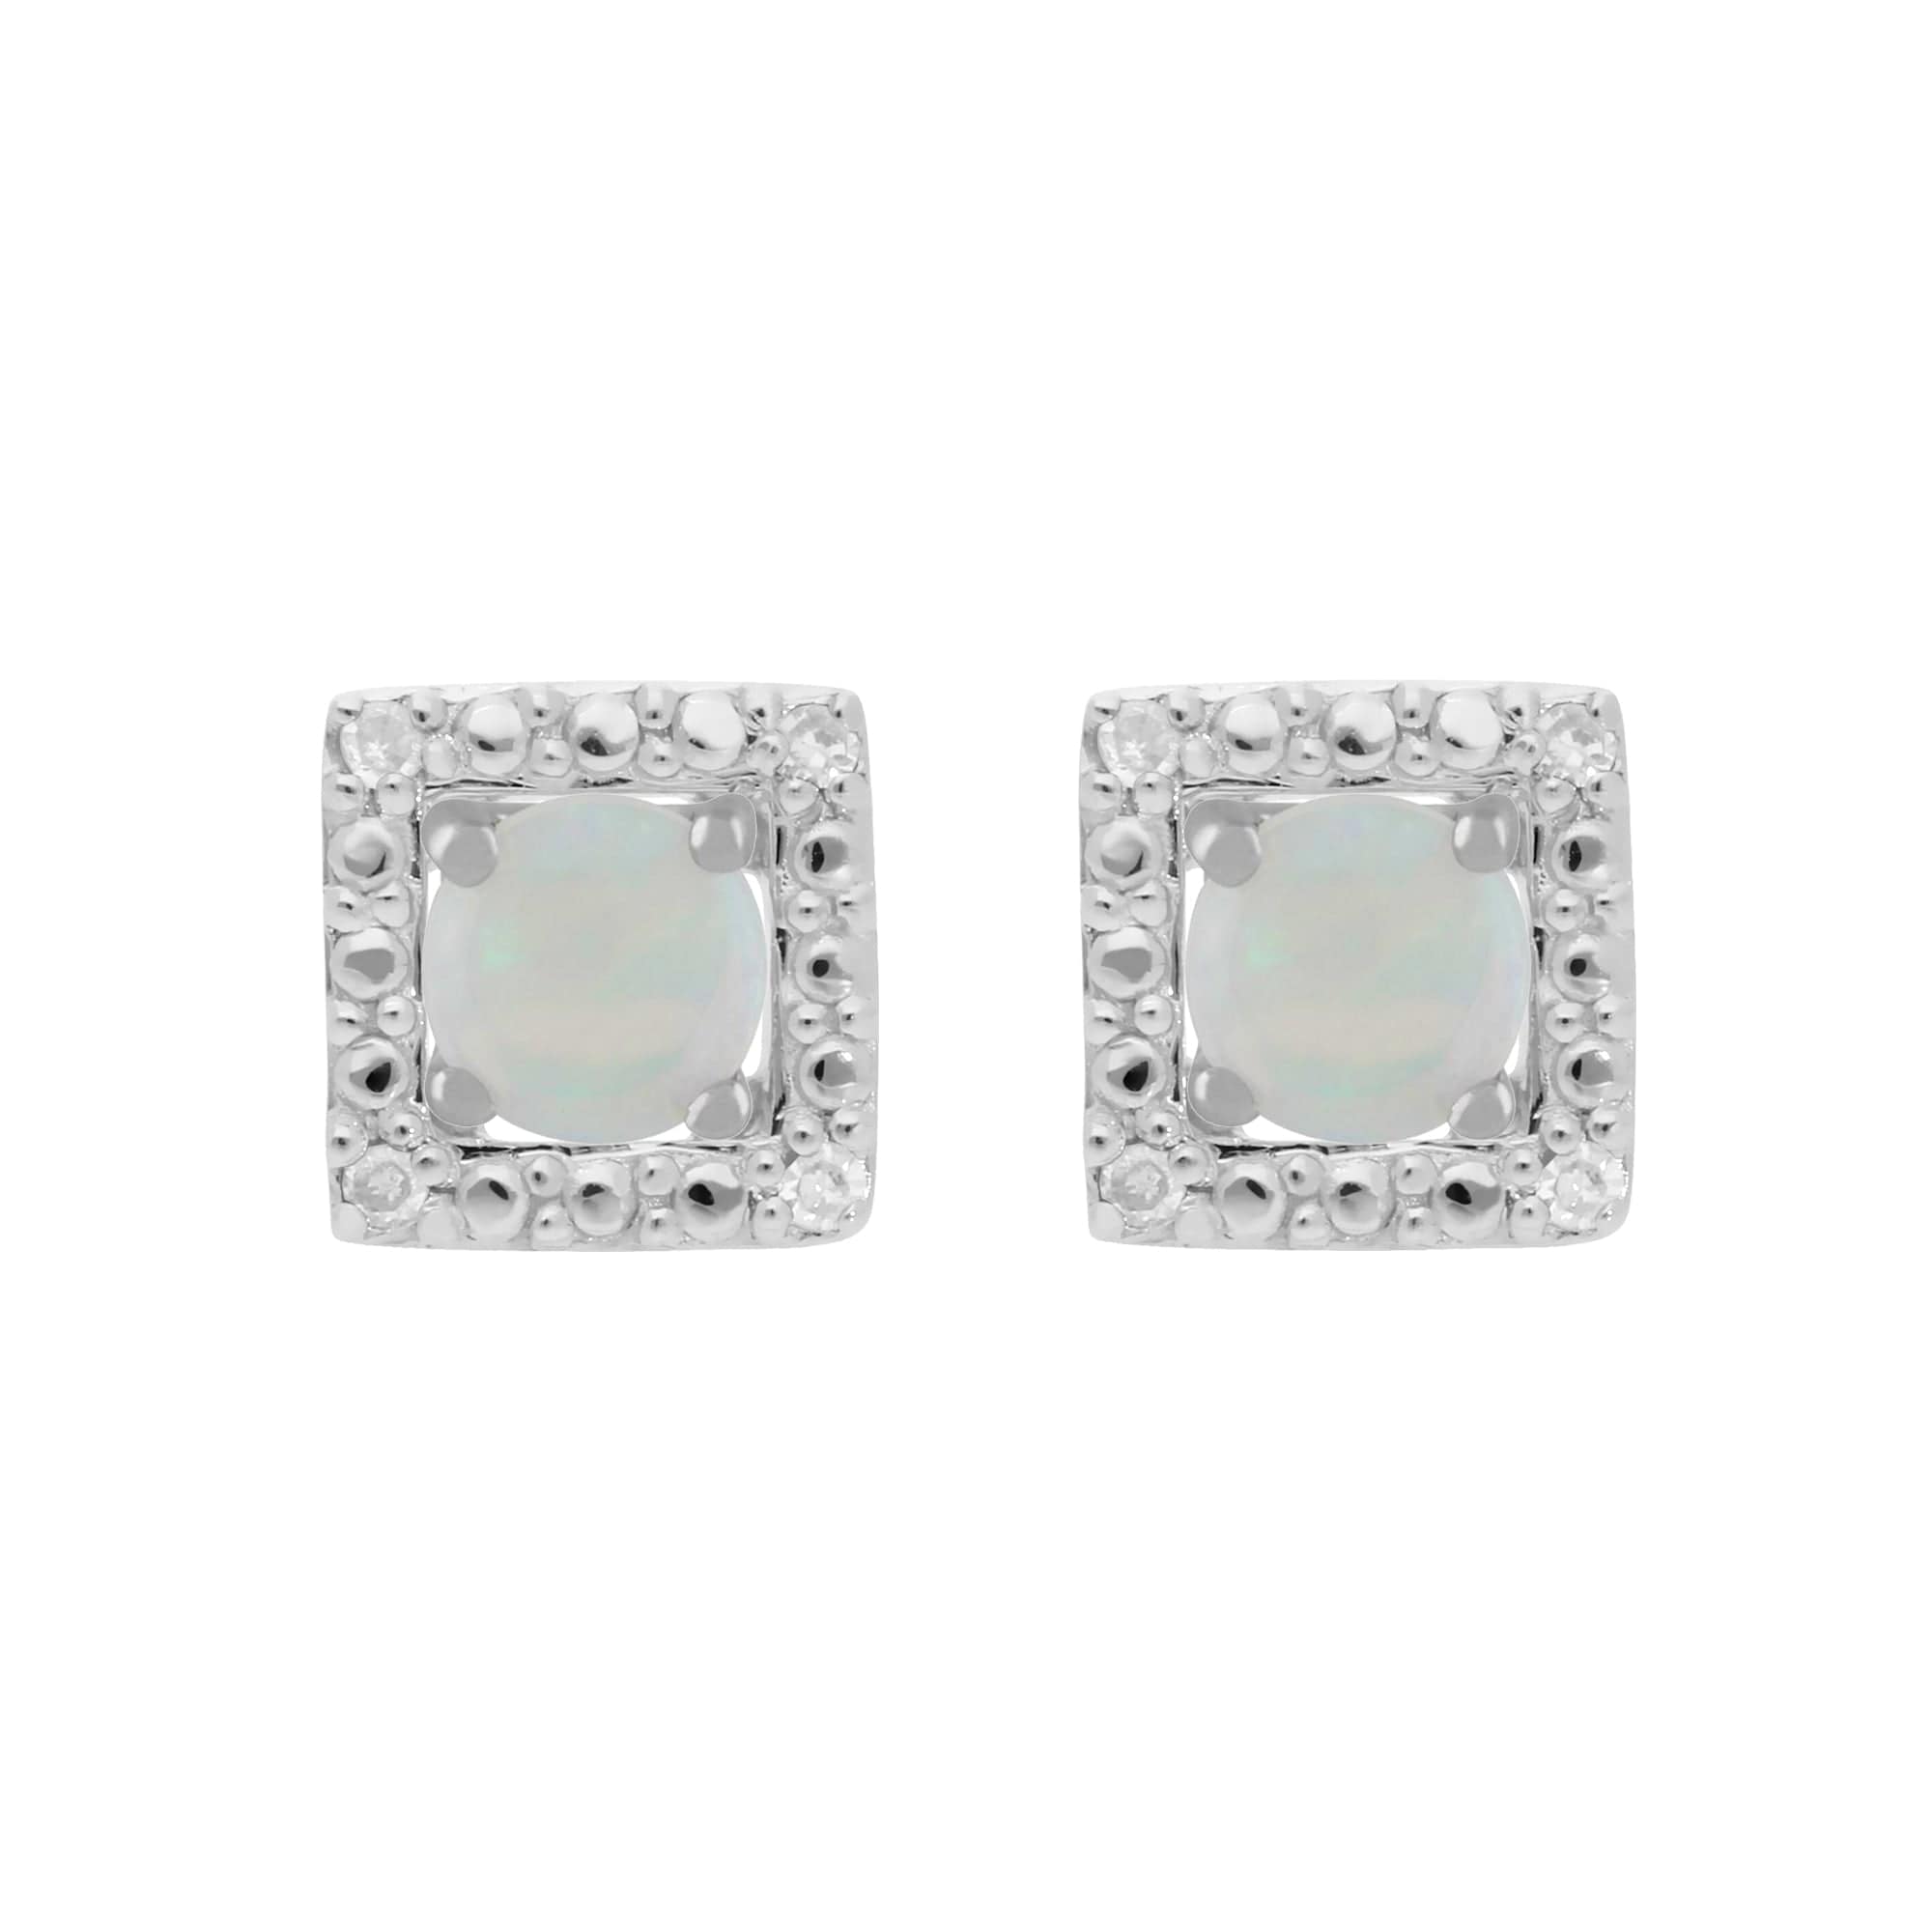 117E0031149-162E0245019 Classic Round Opal Stud Earrings with Detachable Diamond Square Ear Jacket in 9ct White Gold 1